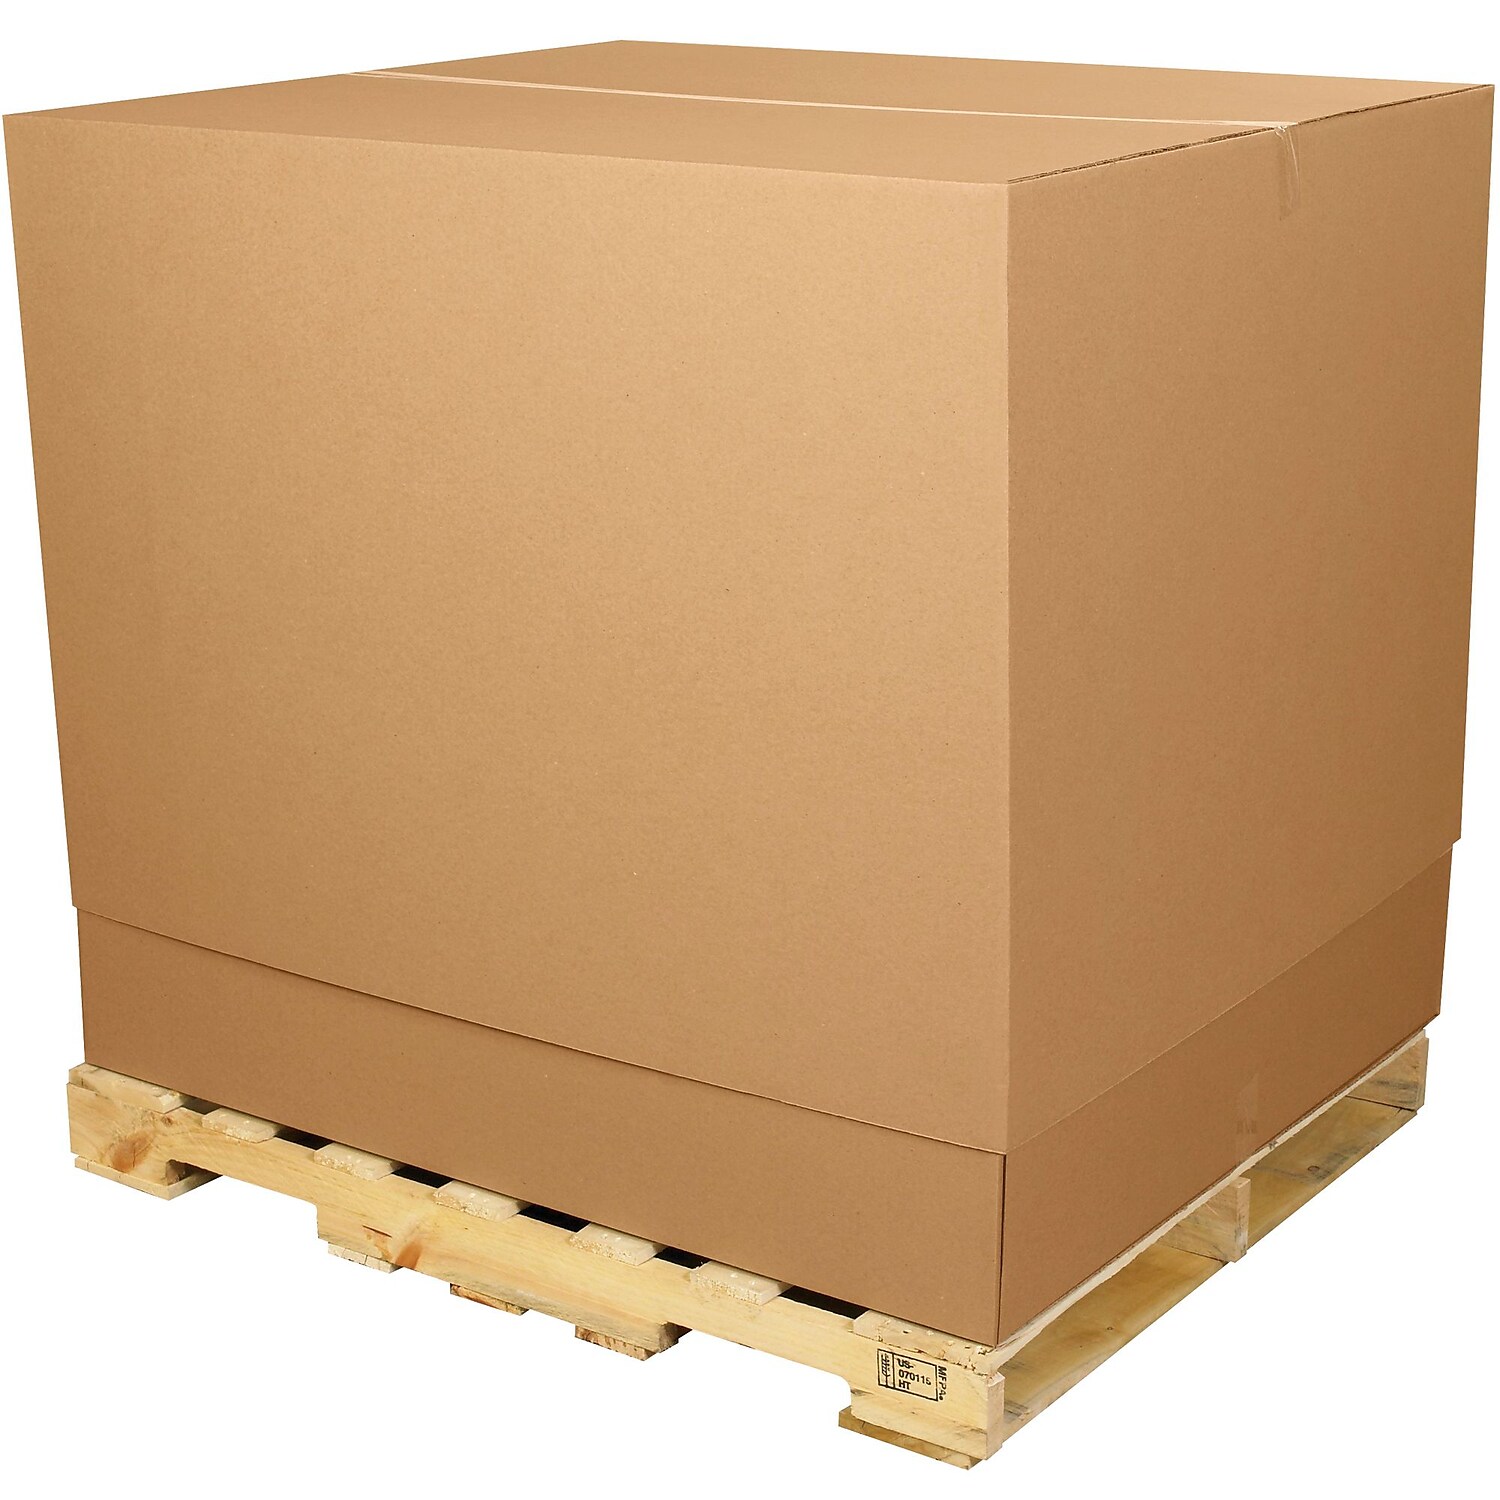 Box Partners Telescoping Outer Boxes 36 1/2" x 36 1/2 x 40" Kraft 5/Bundle TELE3636TOP - image 1 of 4